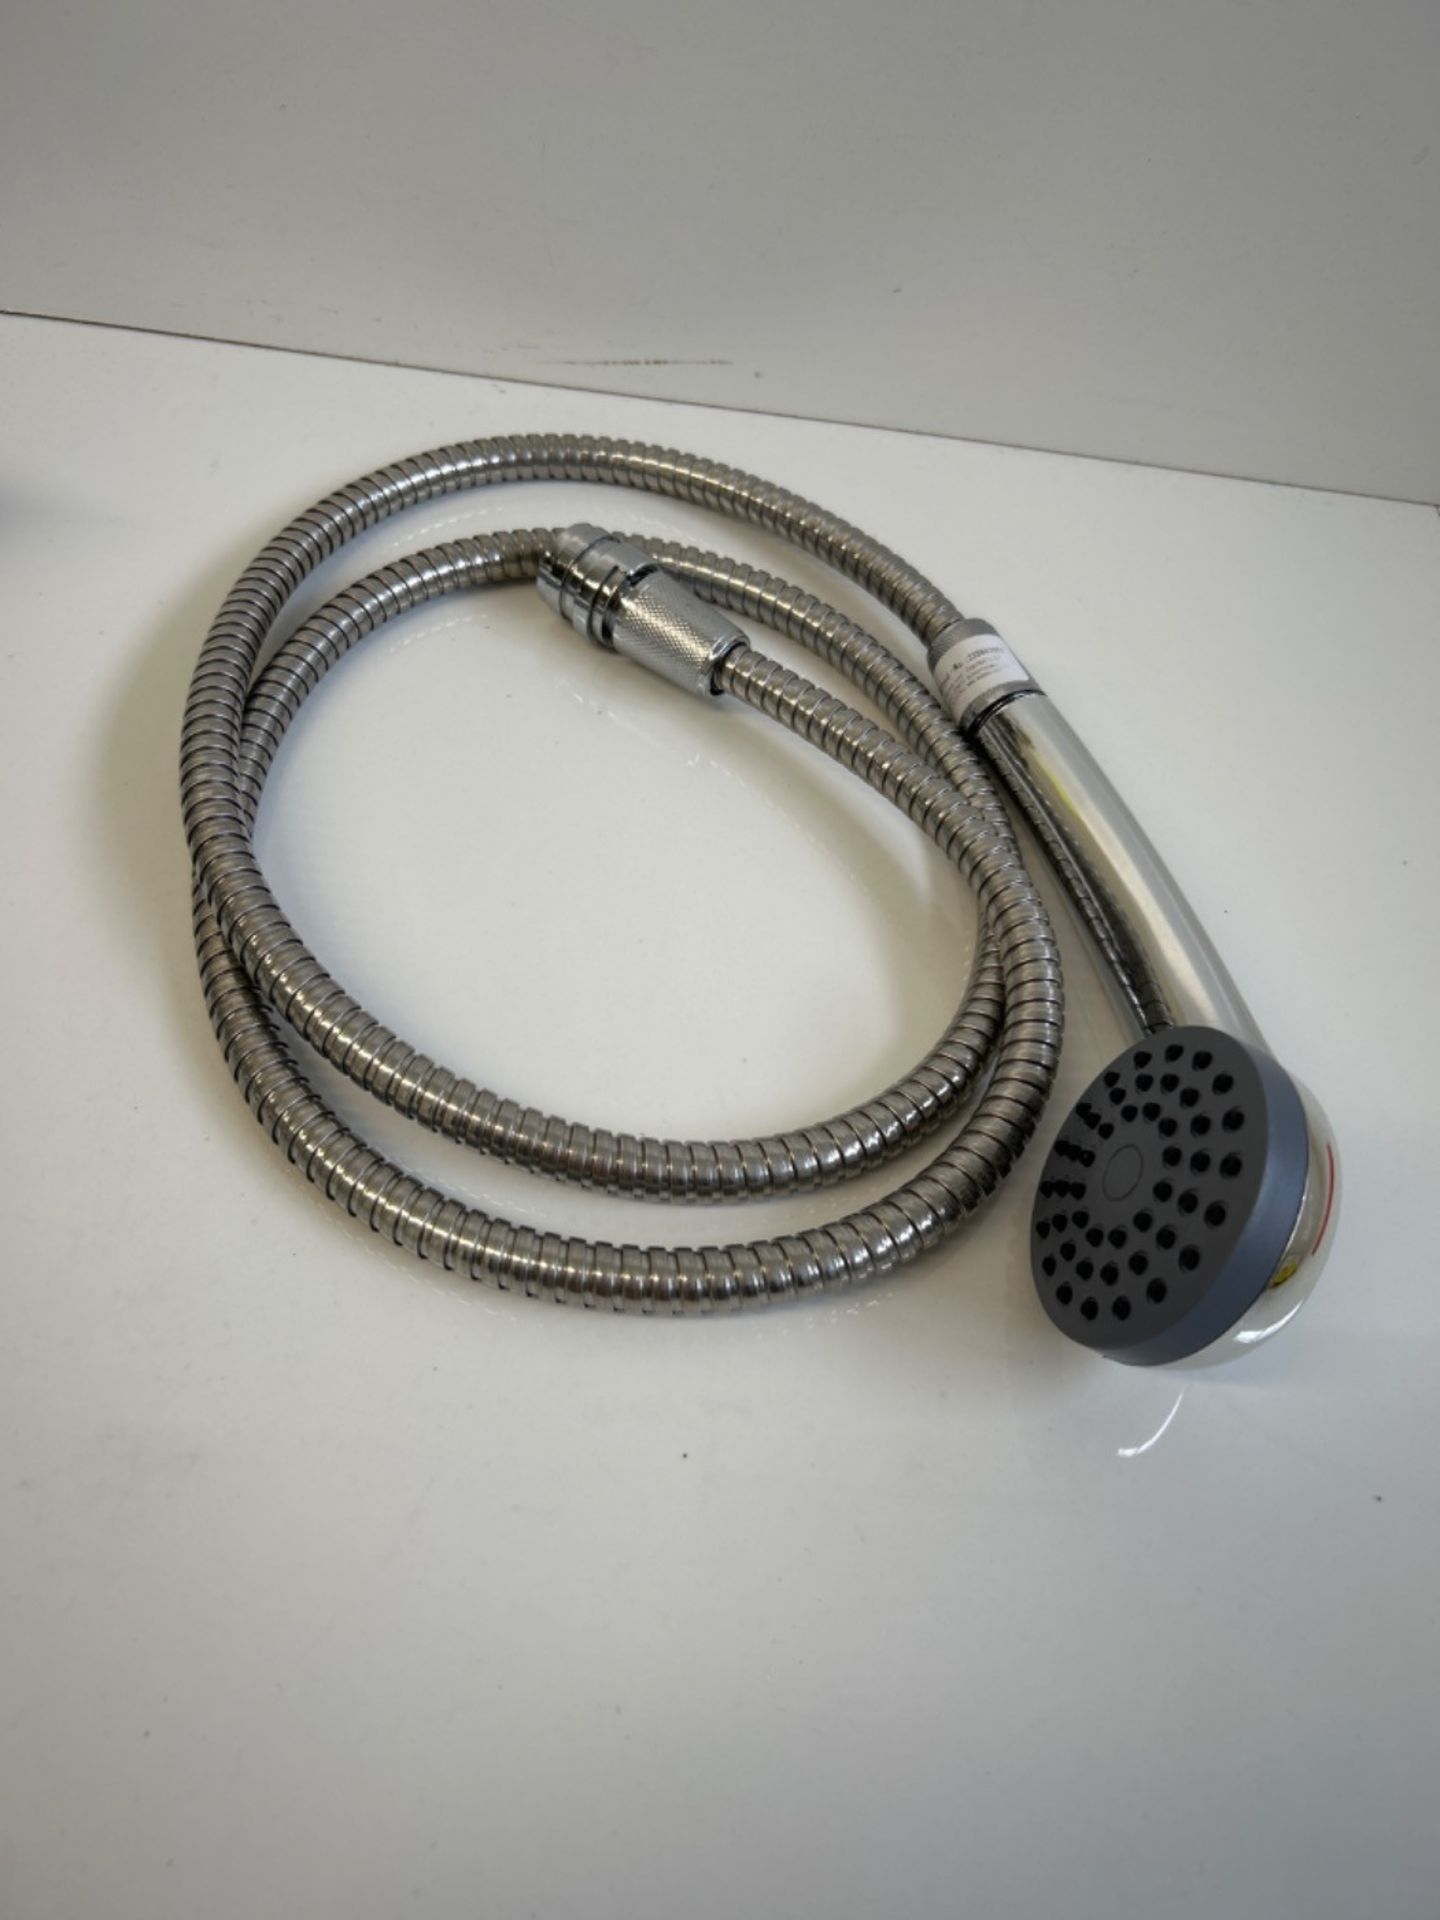 Wenko WK22866 Handbasin-Mobile Hand Stainless Steel Shower Hose, Silver Shiny, 6.5 X 150 X 3.5 Cm - Image 2 of 3